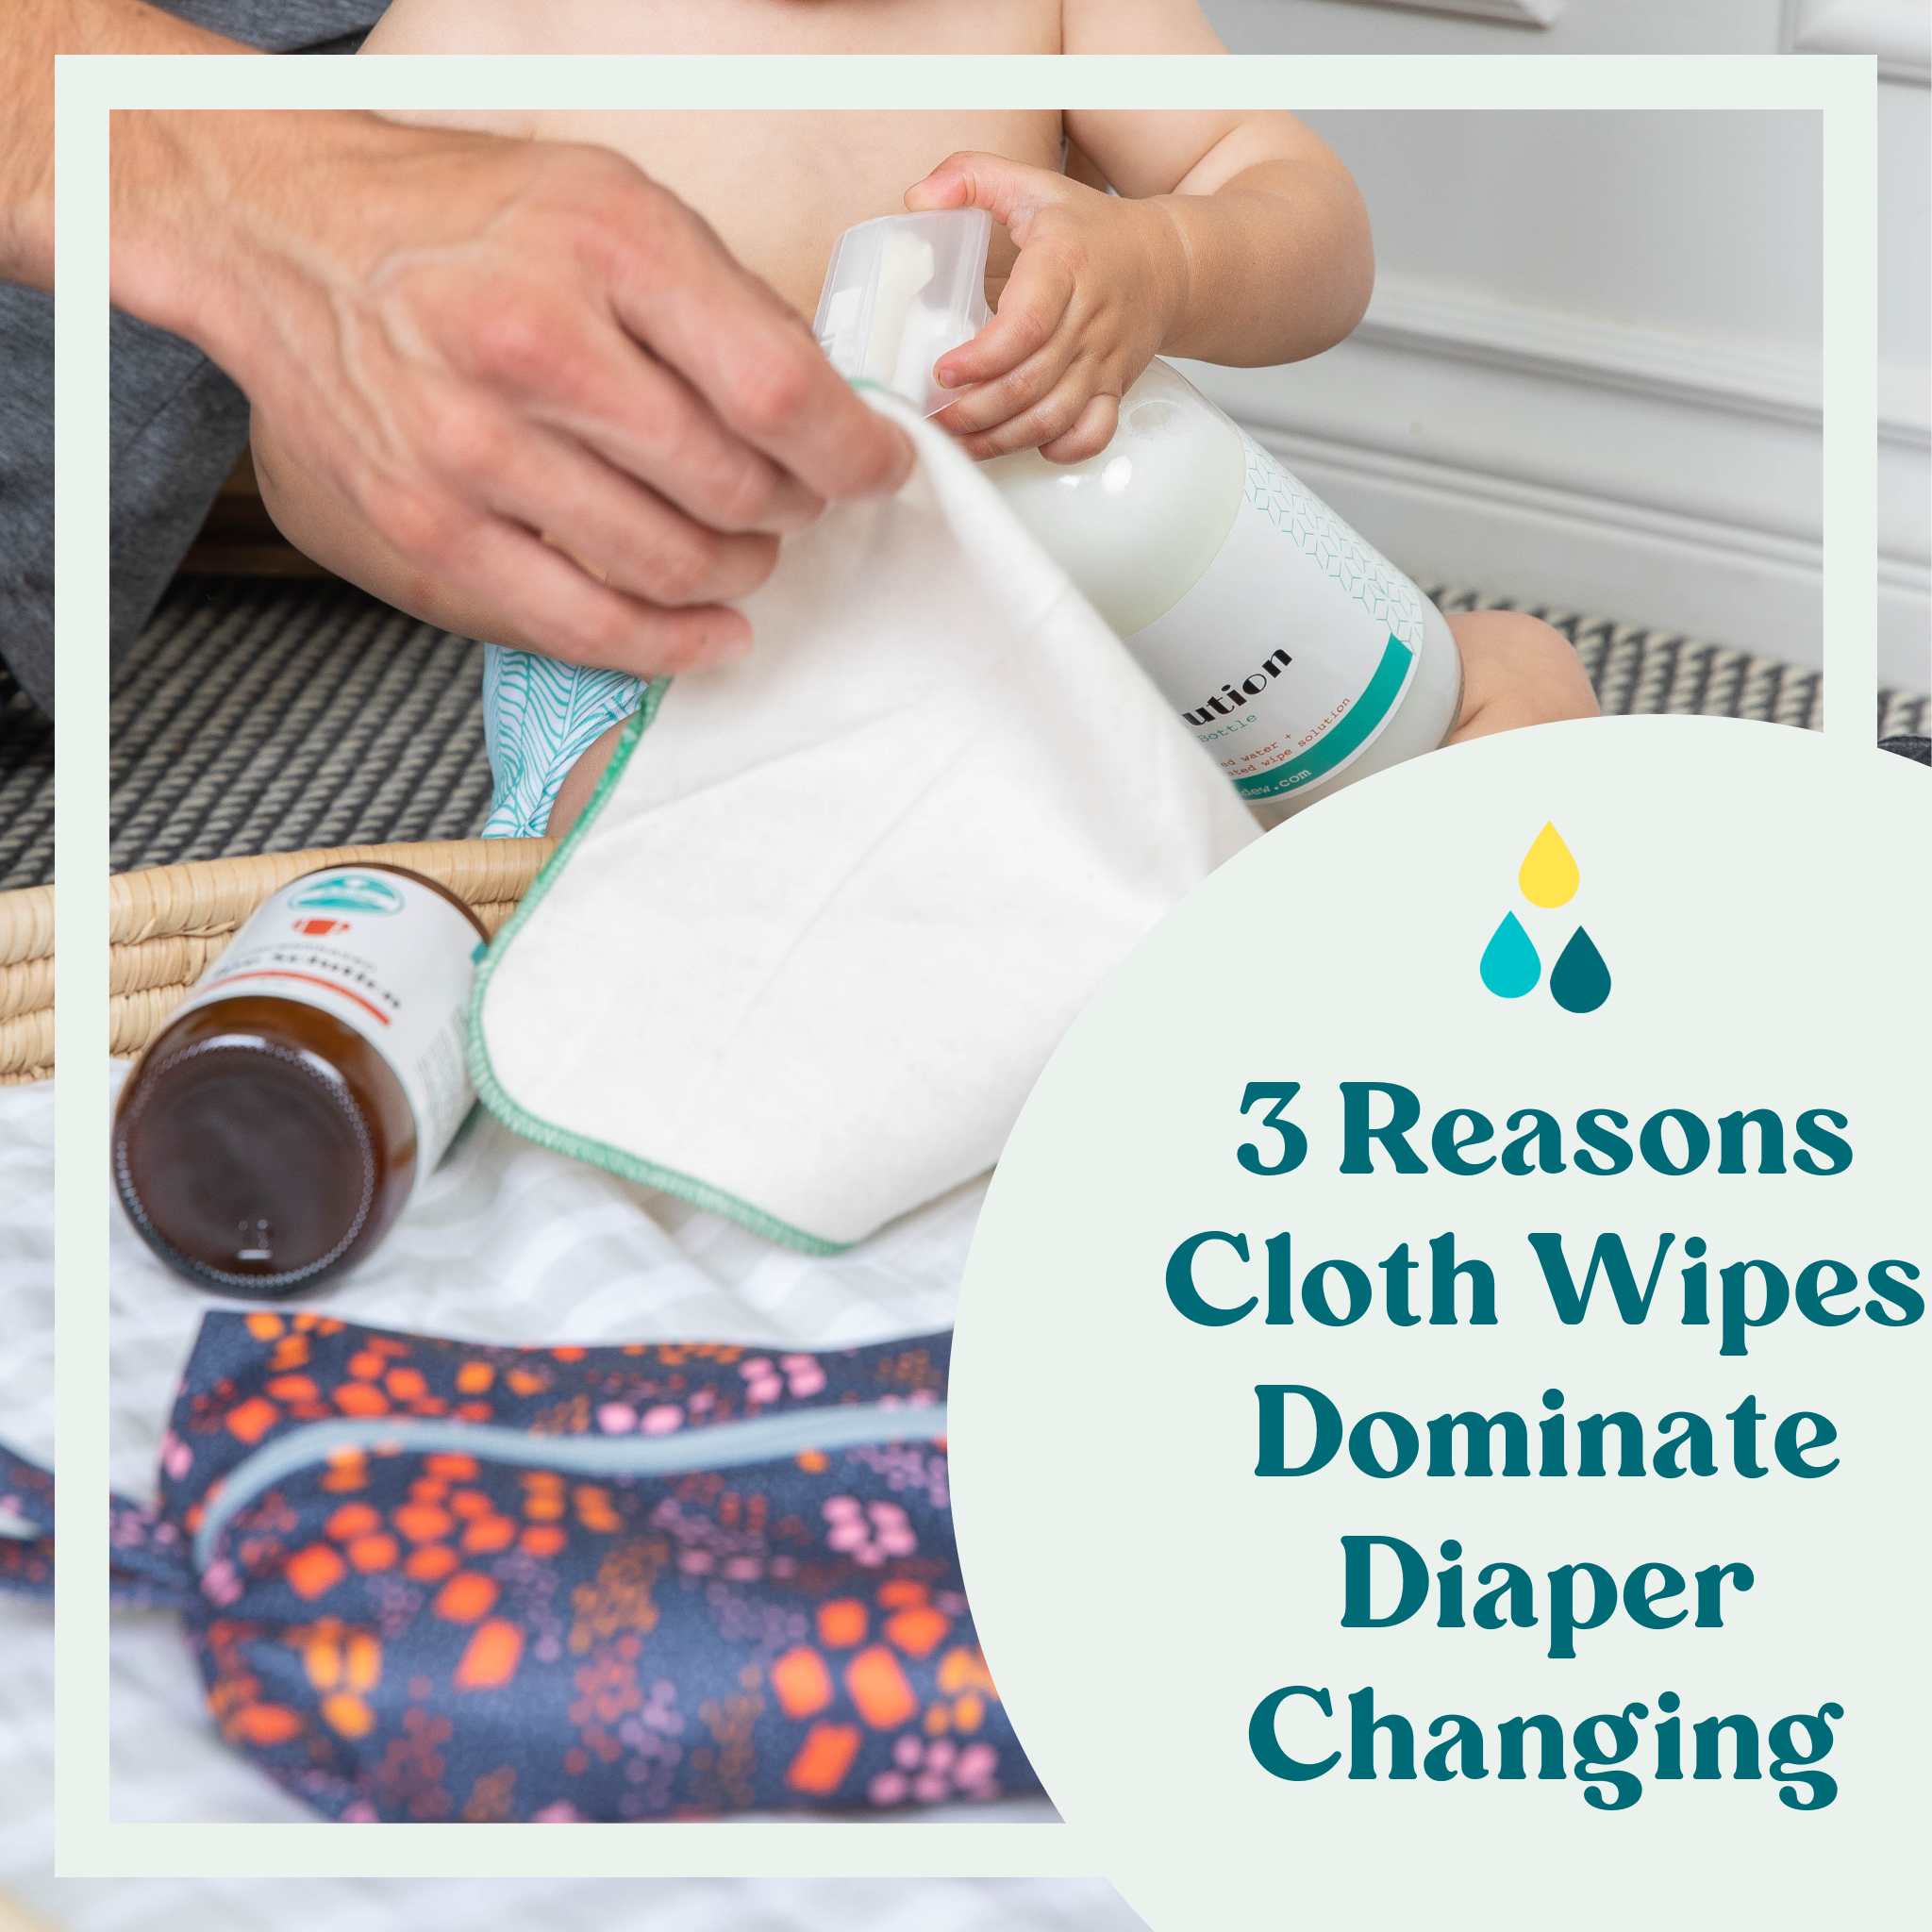 The Triple Threat: 3 Reasons Cloth Wipes Dominate Diaper Changing